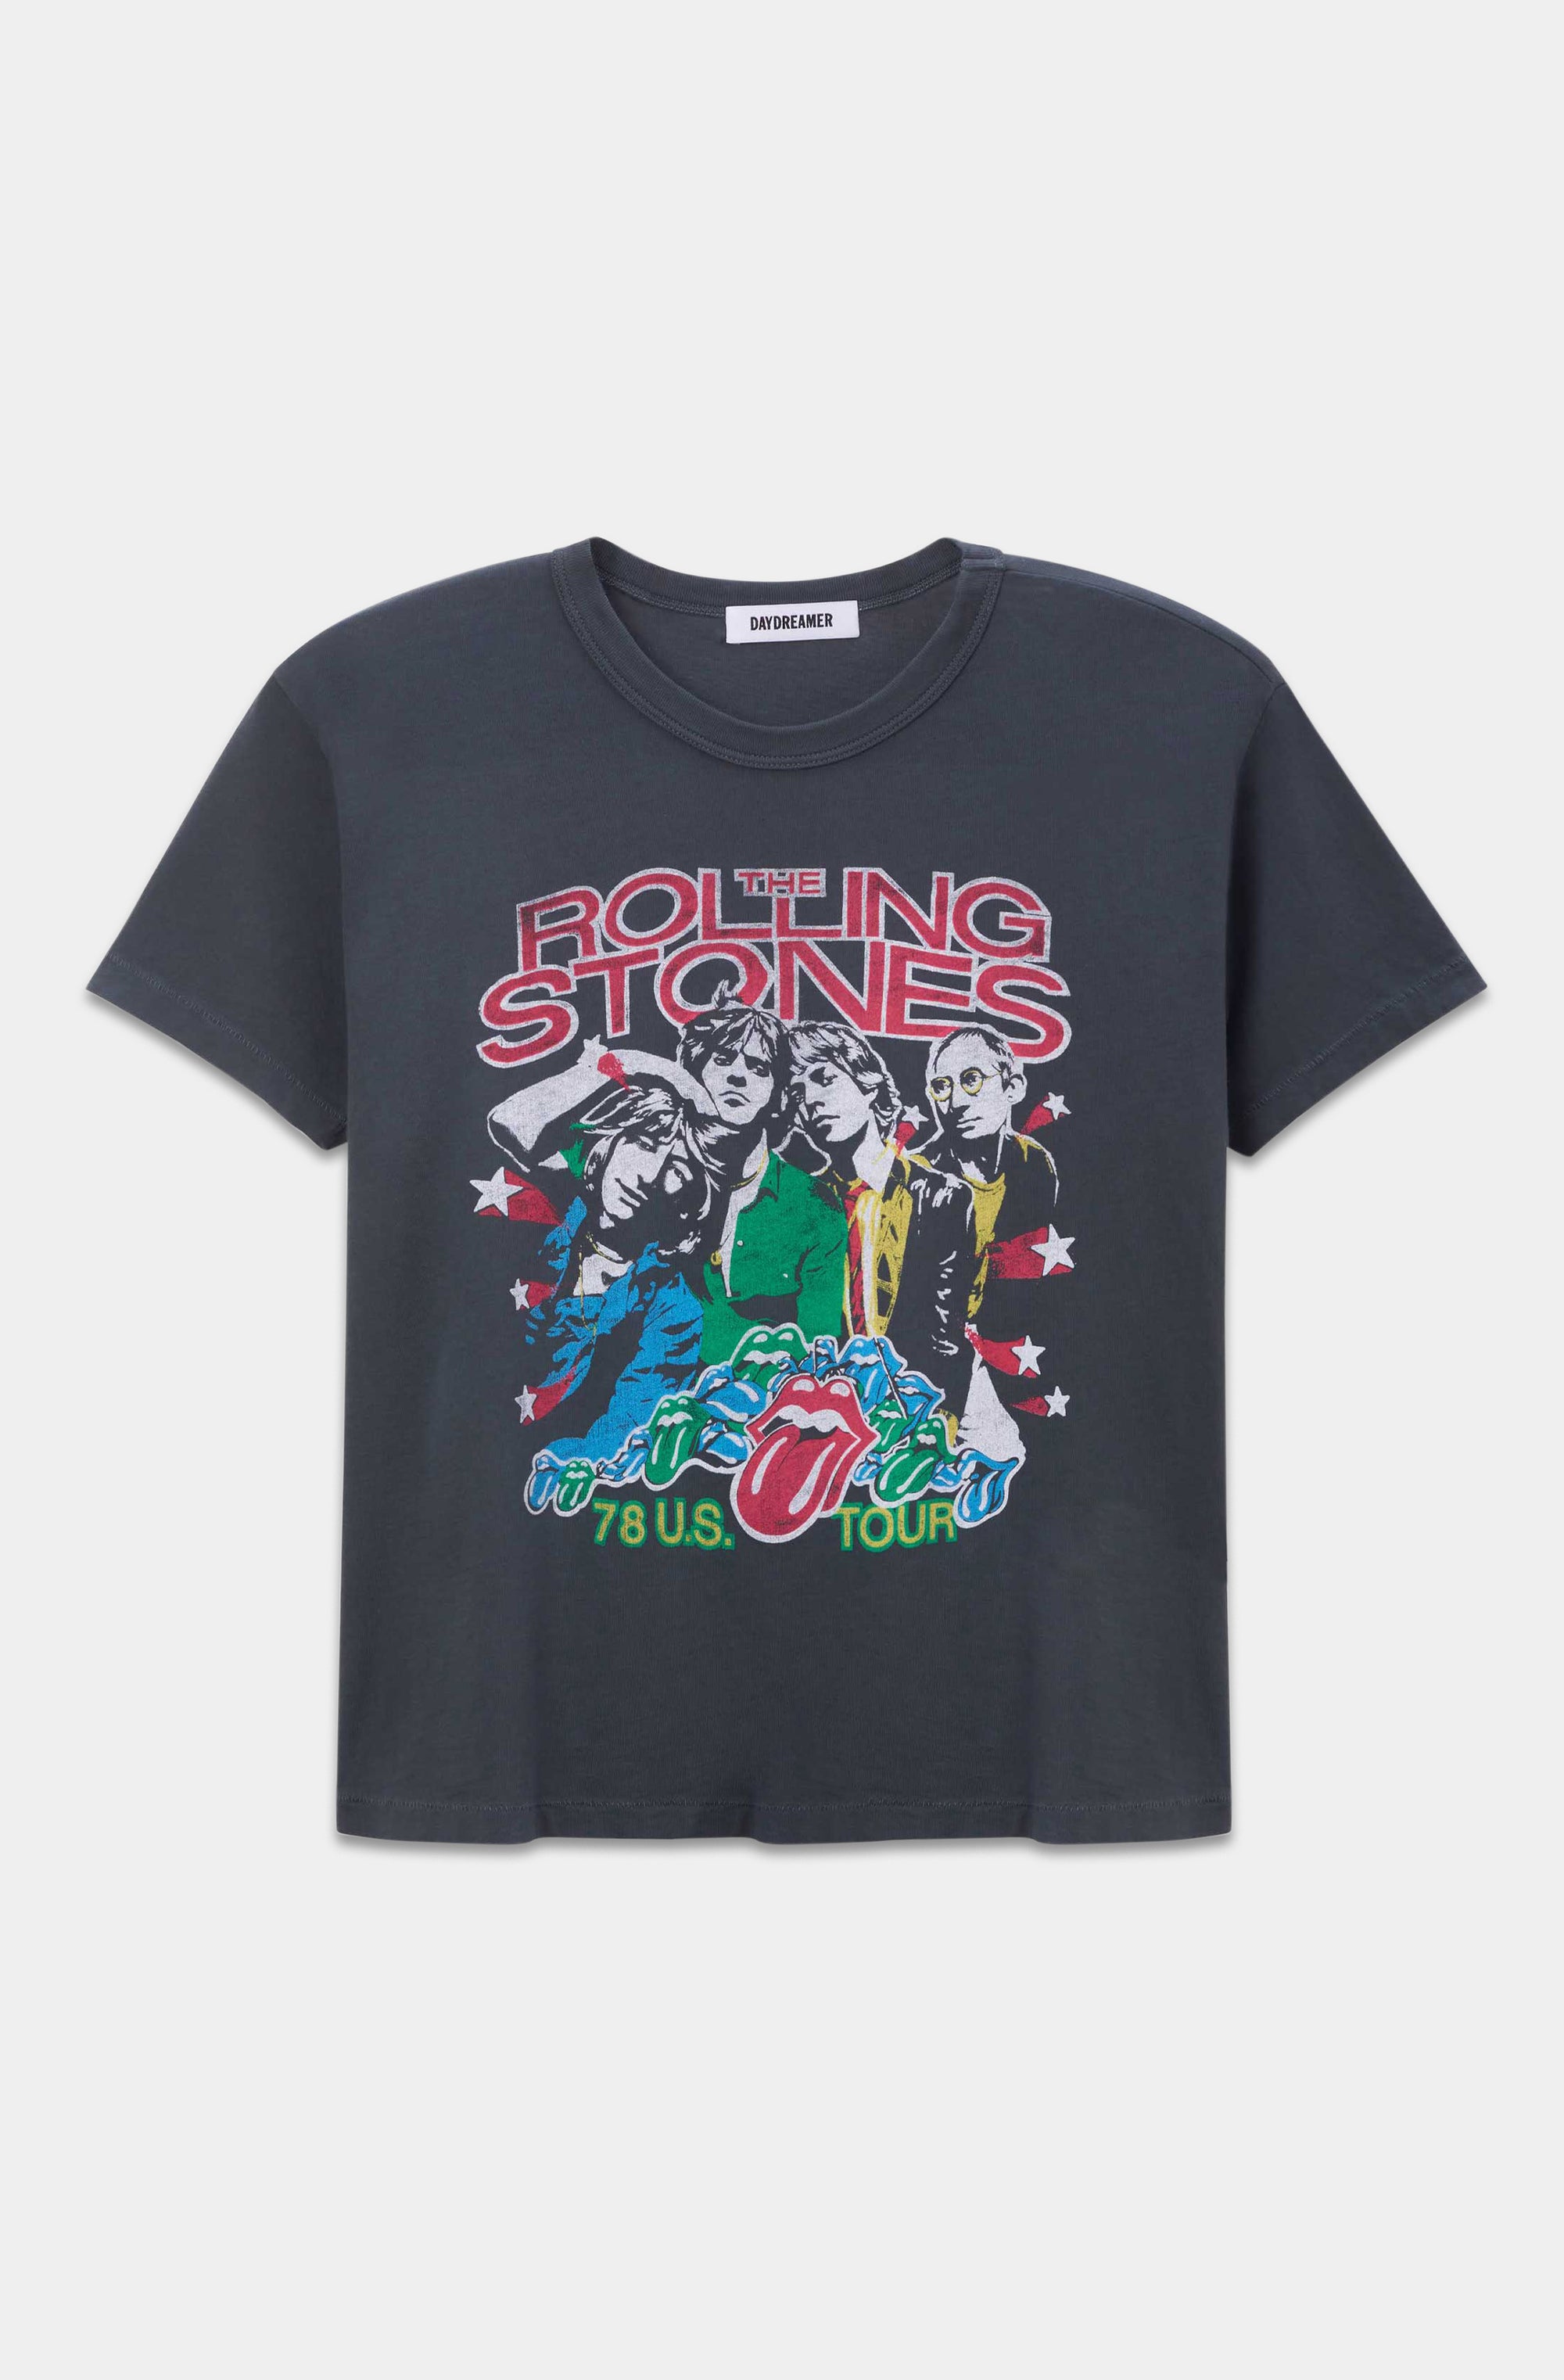 Rolling Stone 78 US Tour Ringer Tee